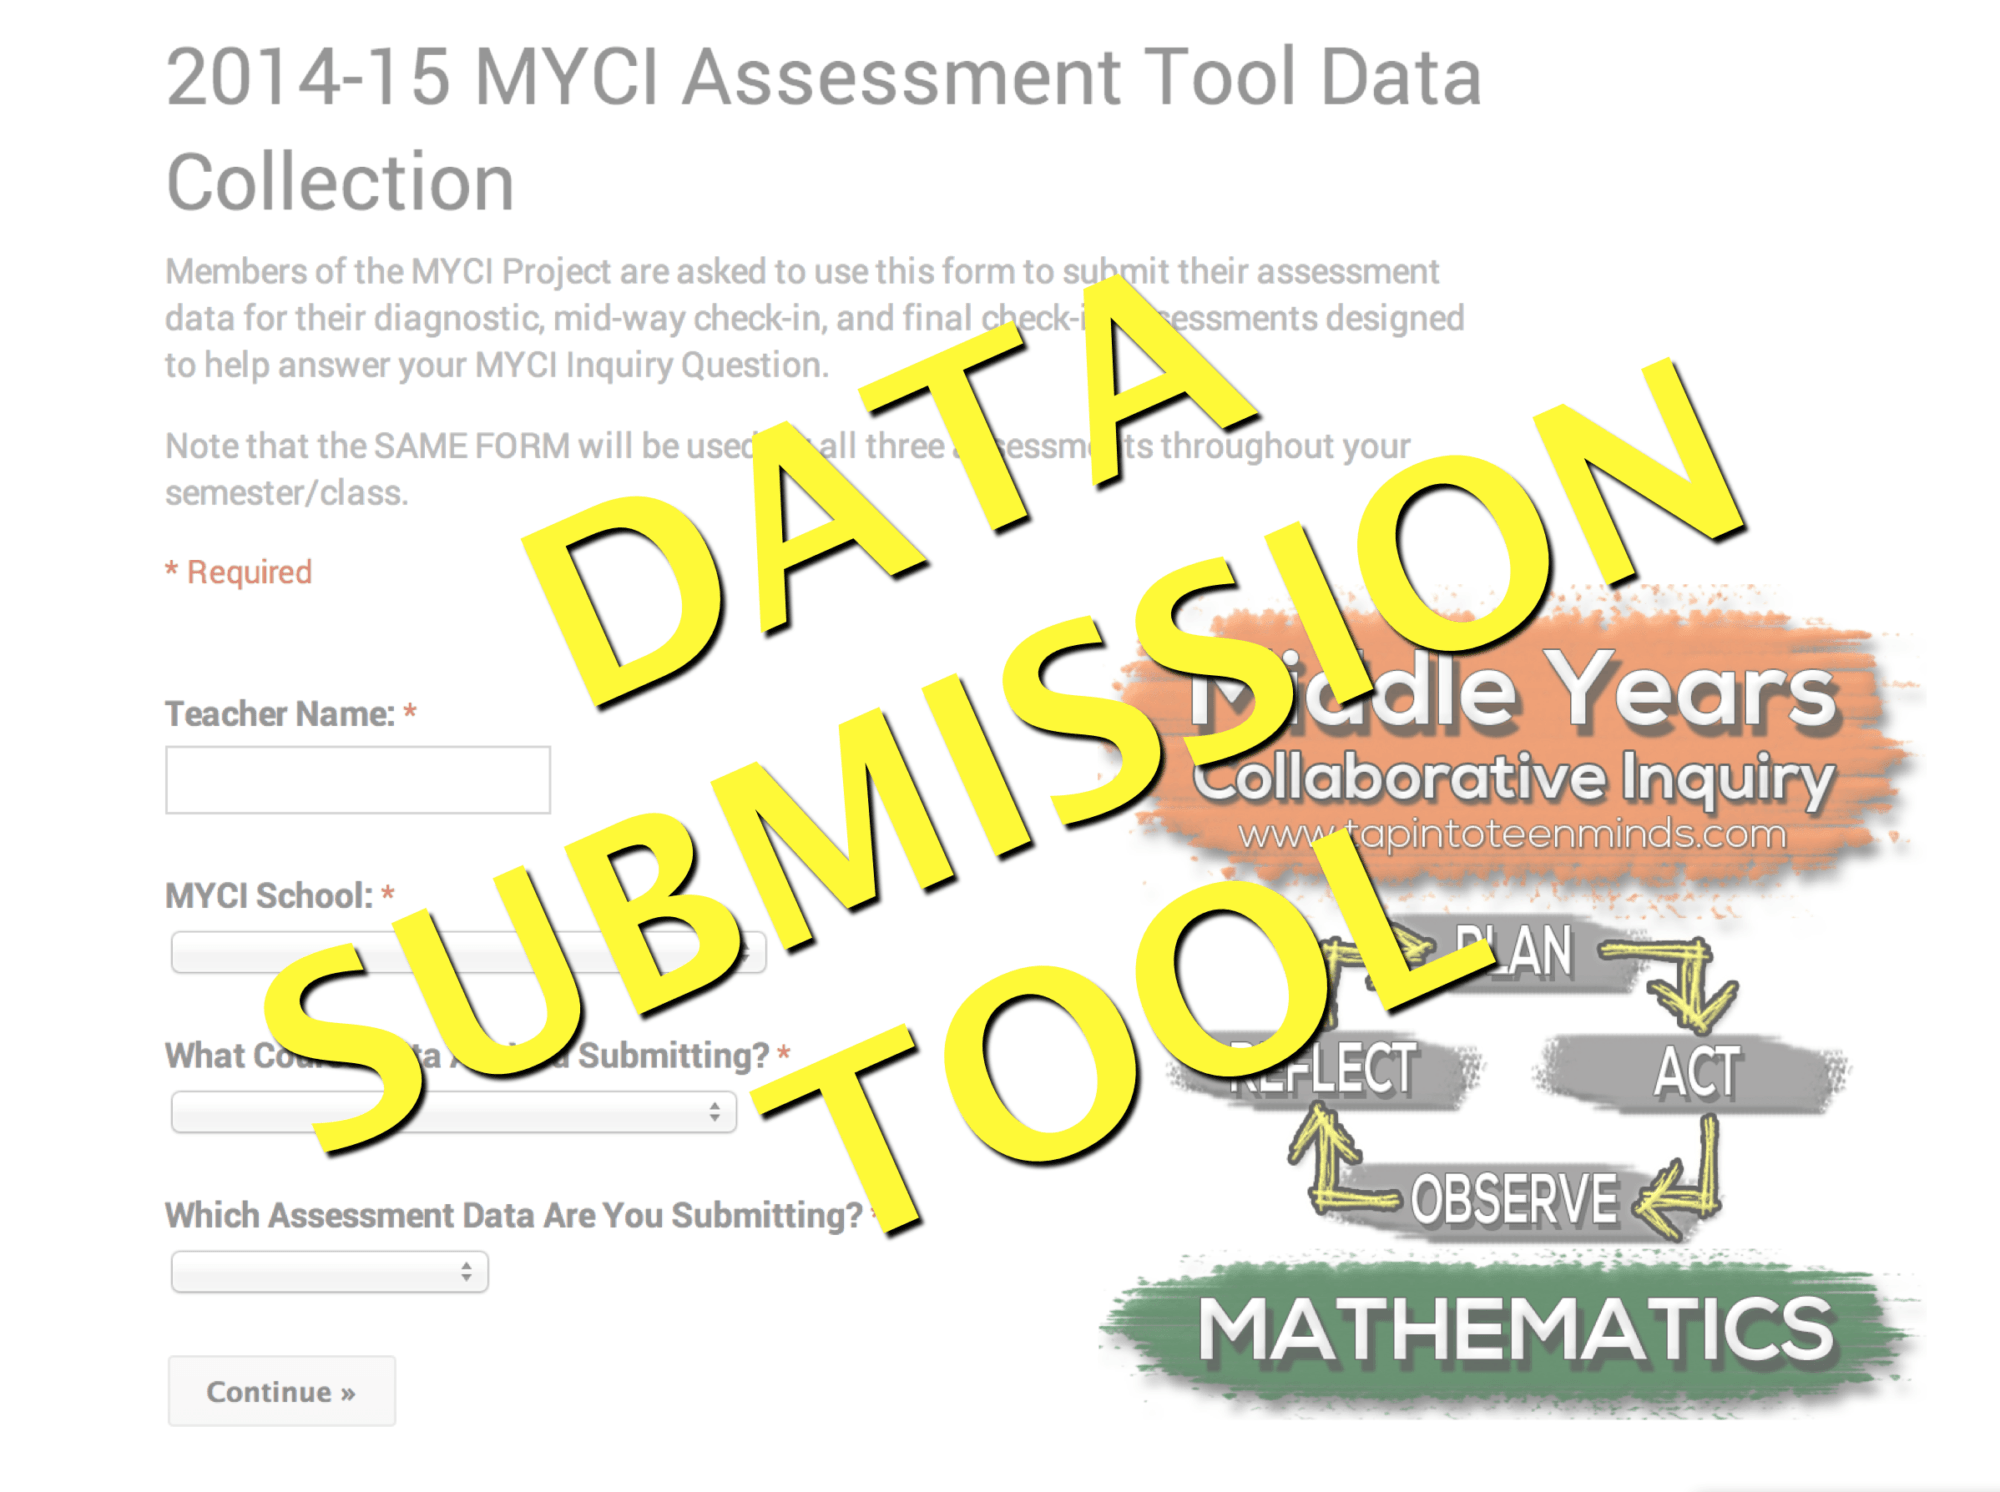 MYCI Monitoring Tool Data Collection Form